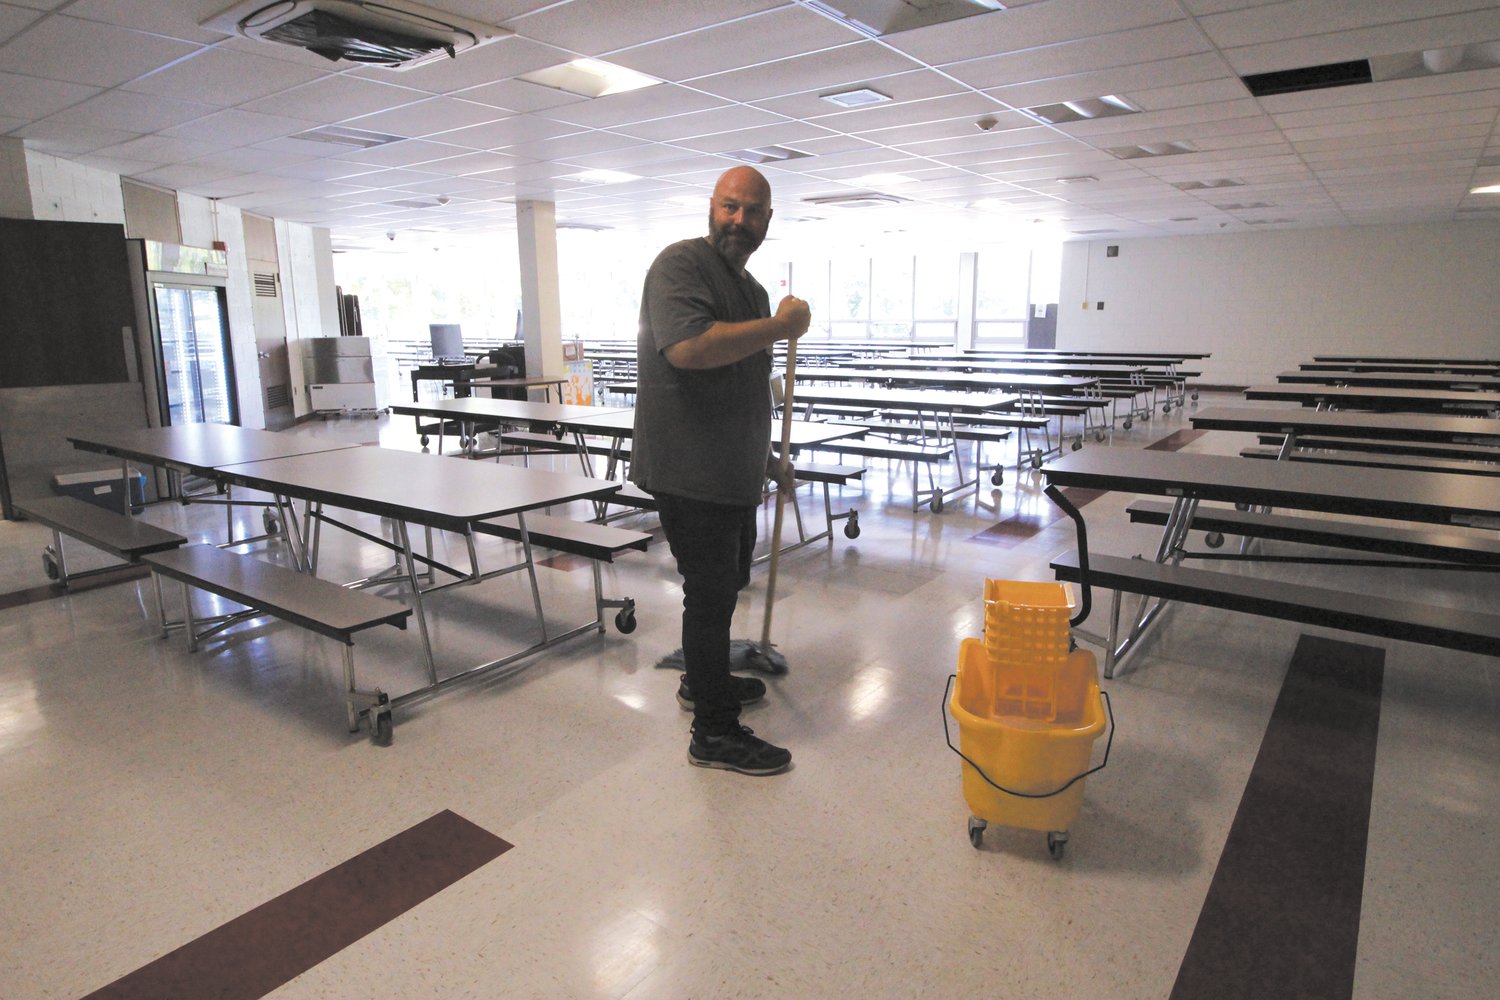 PUTTING ON THE SHINE: The Winman cafeteria, which has new flooring and lighting, gets a final cleaning.